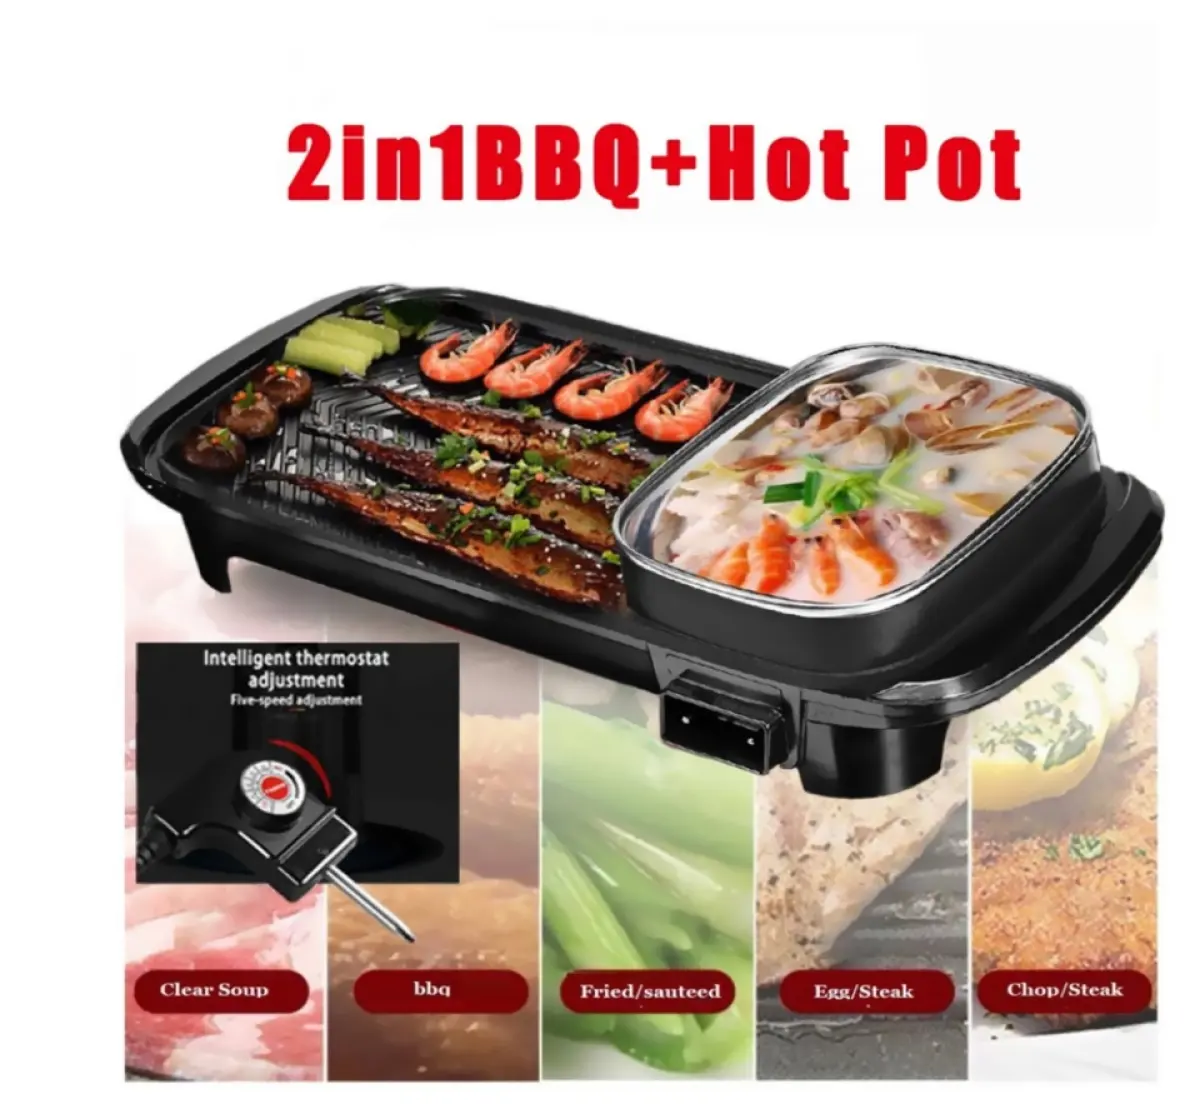 High Quality Multi-functional 2 in 1 Electric BBQ Grill With Hot Pot